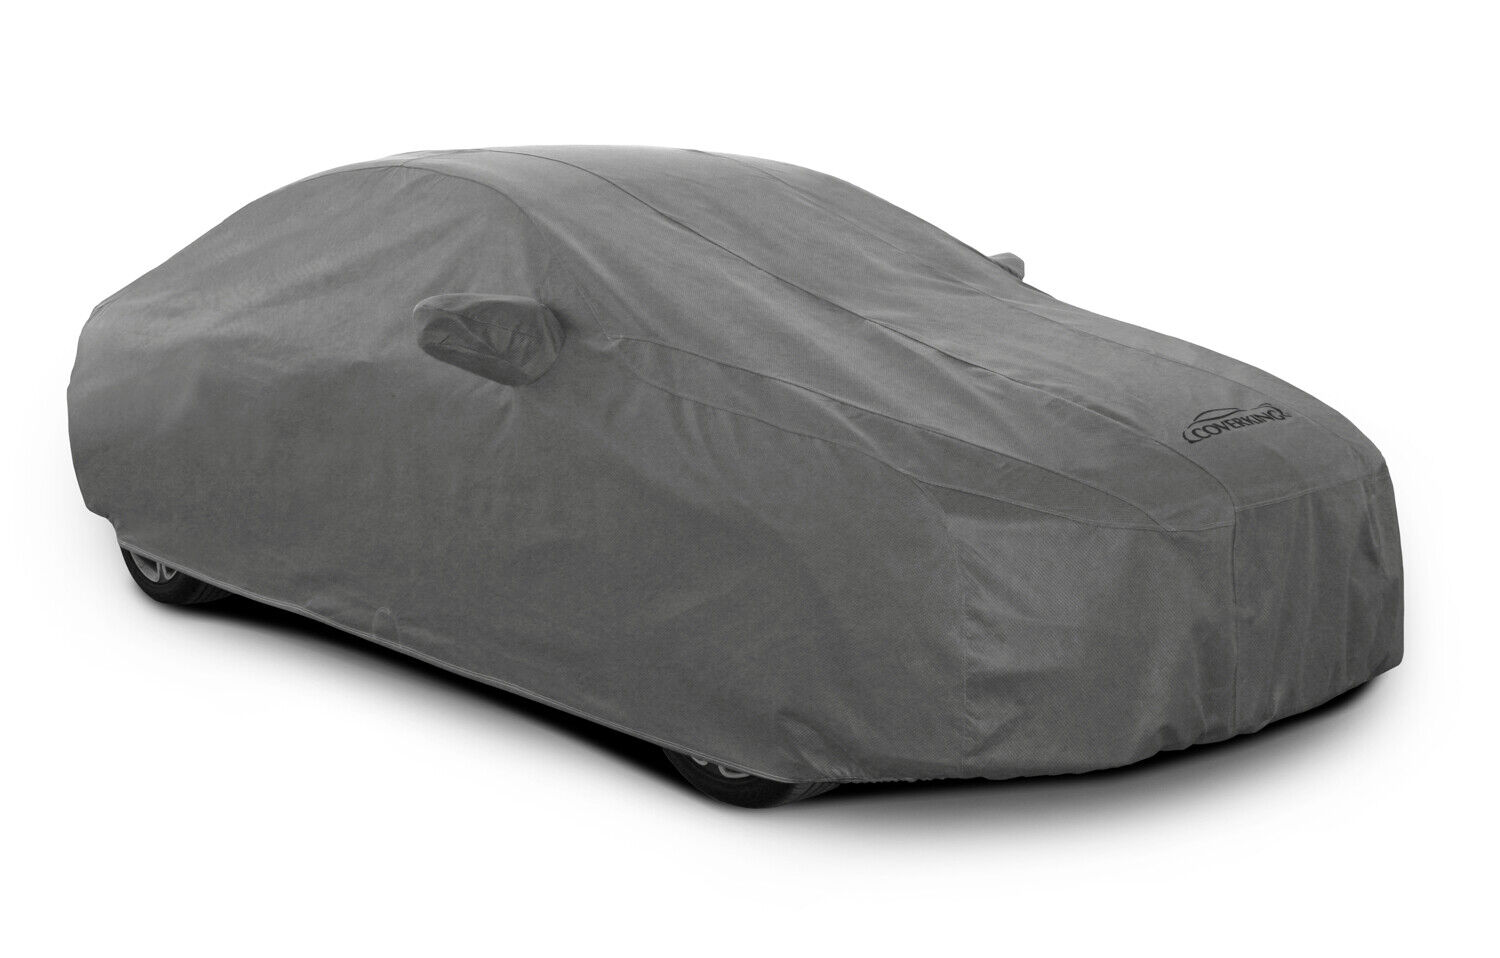 Coverking Coverbond-4 Tailored Car Cover for Bentley Mulsanne - 4 Thick Layers